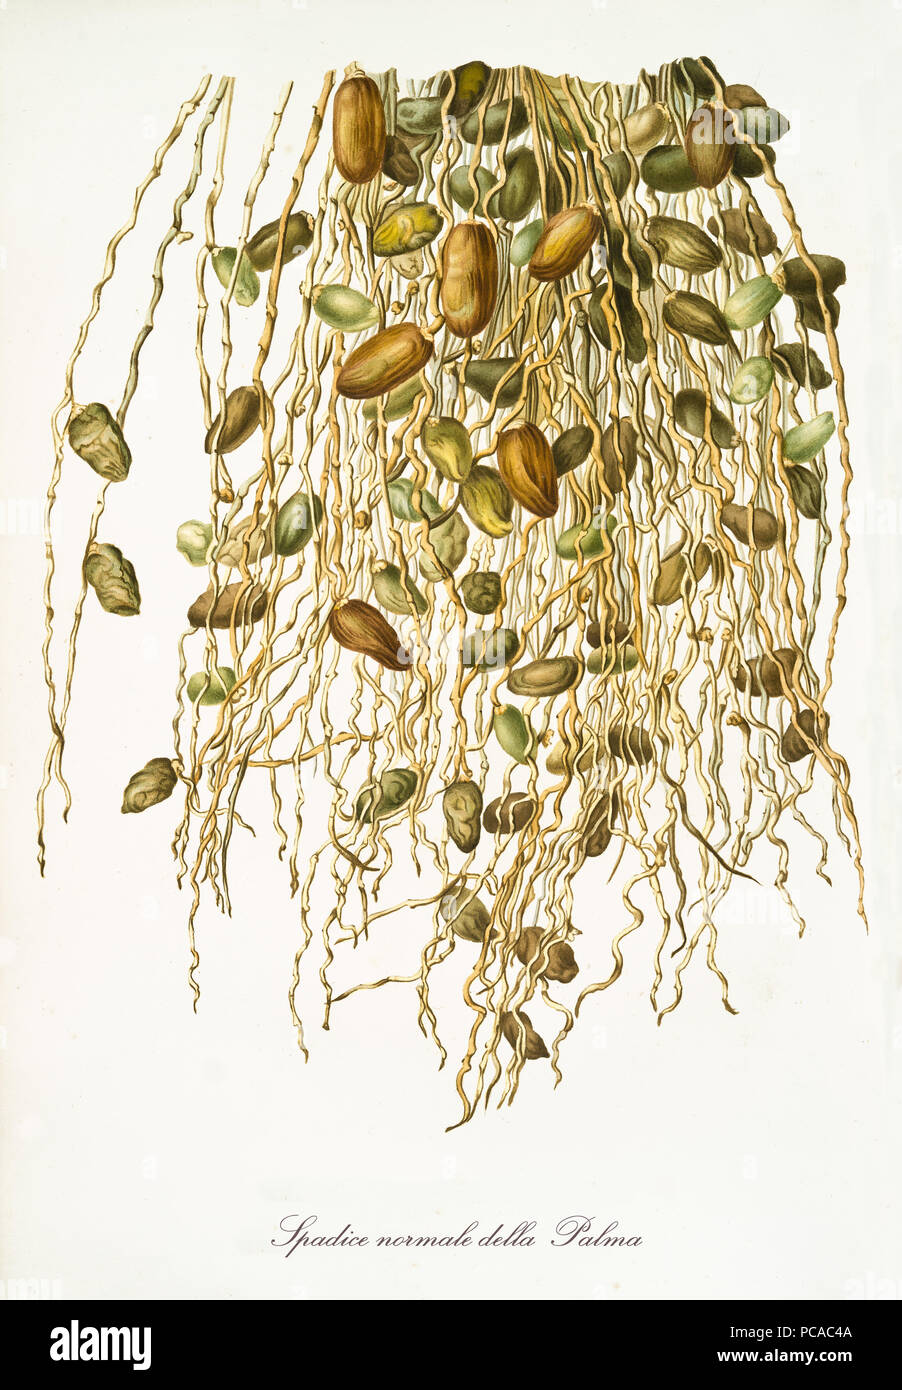 Spadix of date palm, group of dates hanging from top, isolated on white background. Old botanical illustration realized in a detailed watercolor style by Giorgio Gallesio on 1817, 1839 Pisa Italy Stock Photo